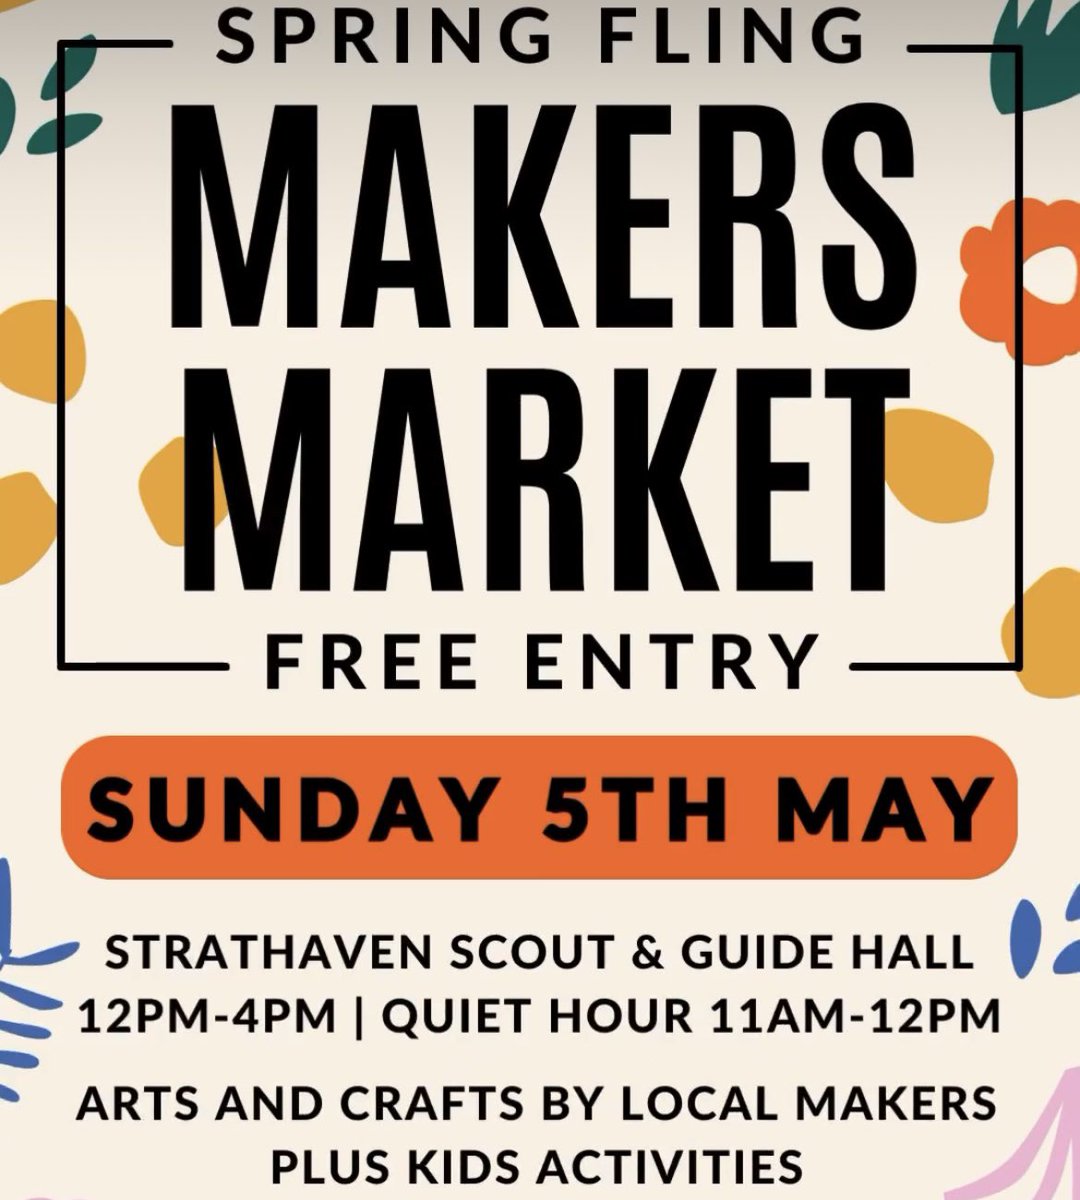 My next event is this market with @CreativeStrath1 on the May bank holiday Sunday in Strathaven. I’ll have my glass creatures of all sizes, some jewellery and other pieces, with some show offers too!
Hopefully see you there!
#SpringFair
#MakersMarket